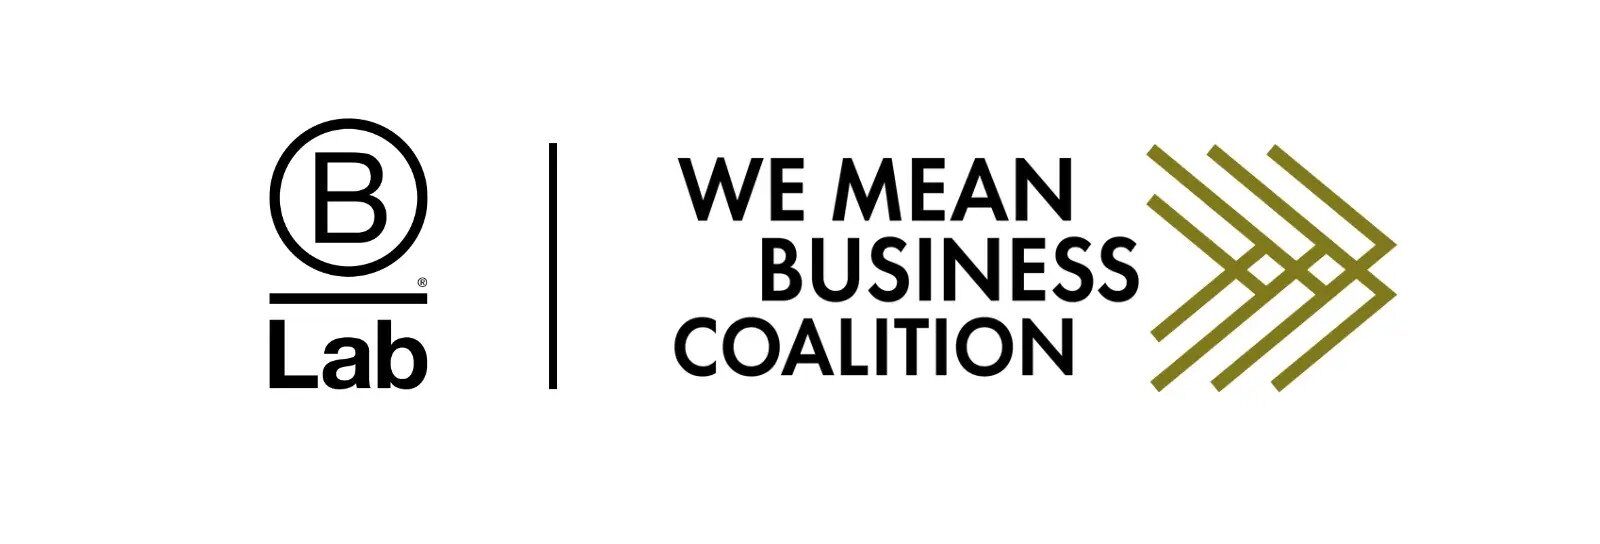 Logos - B Lab, We Mean Business Coalition